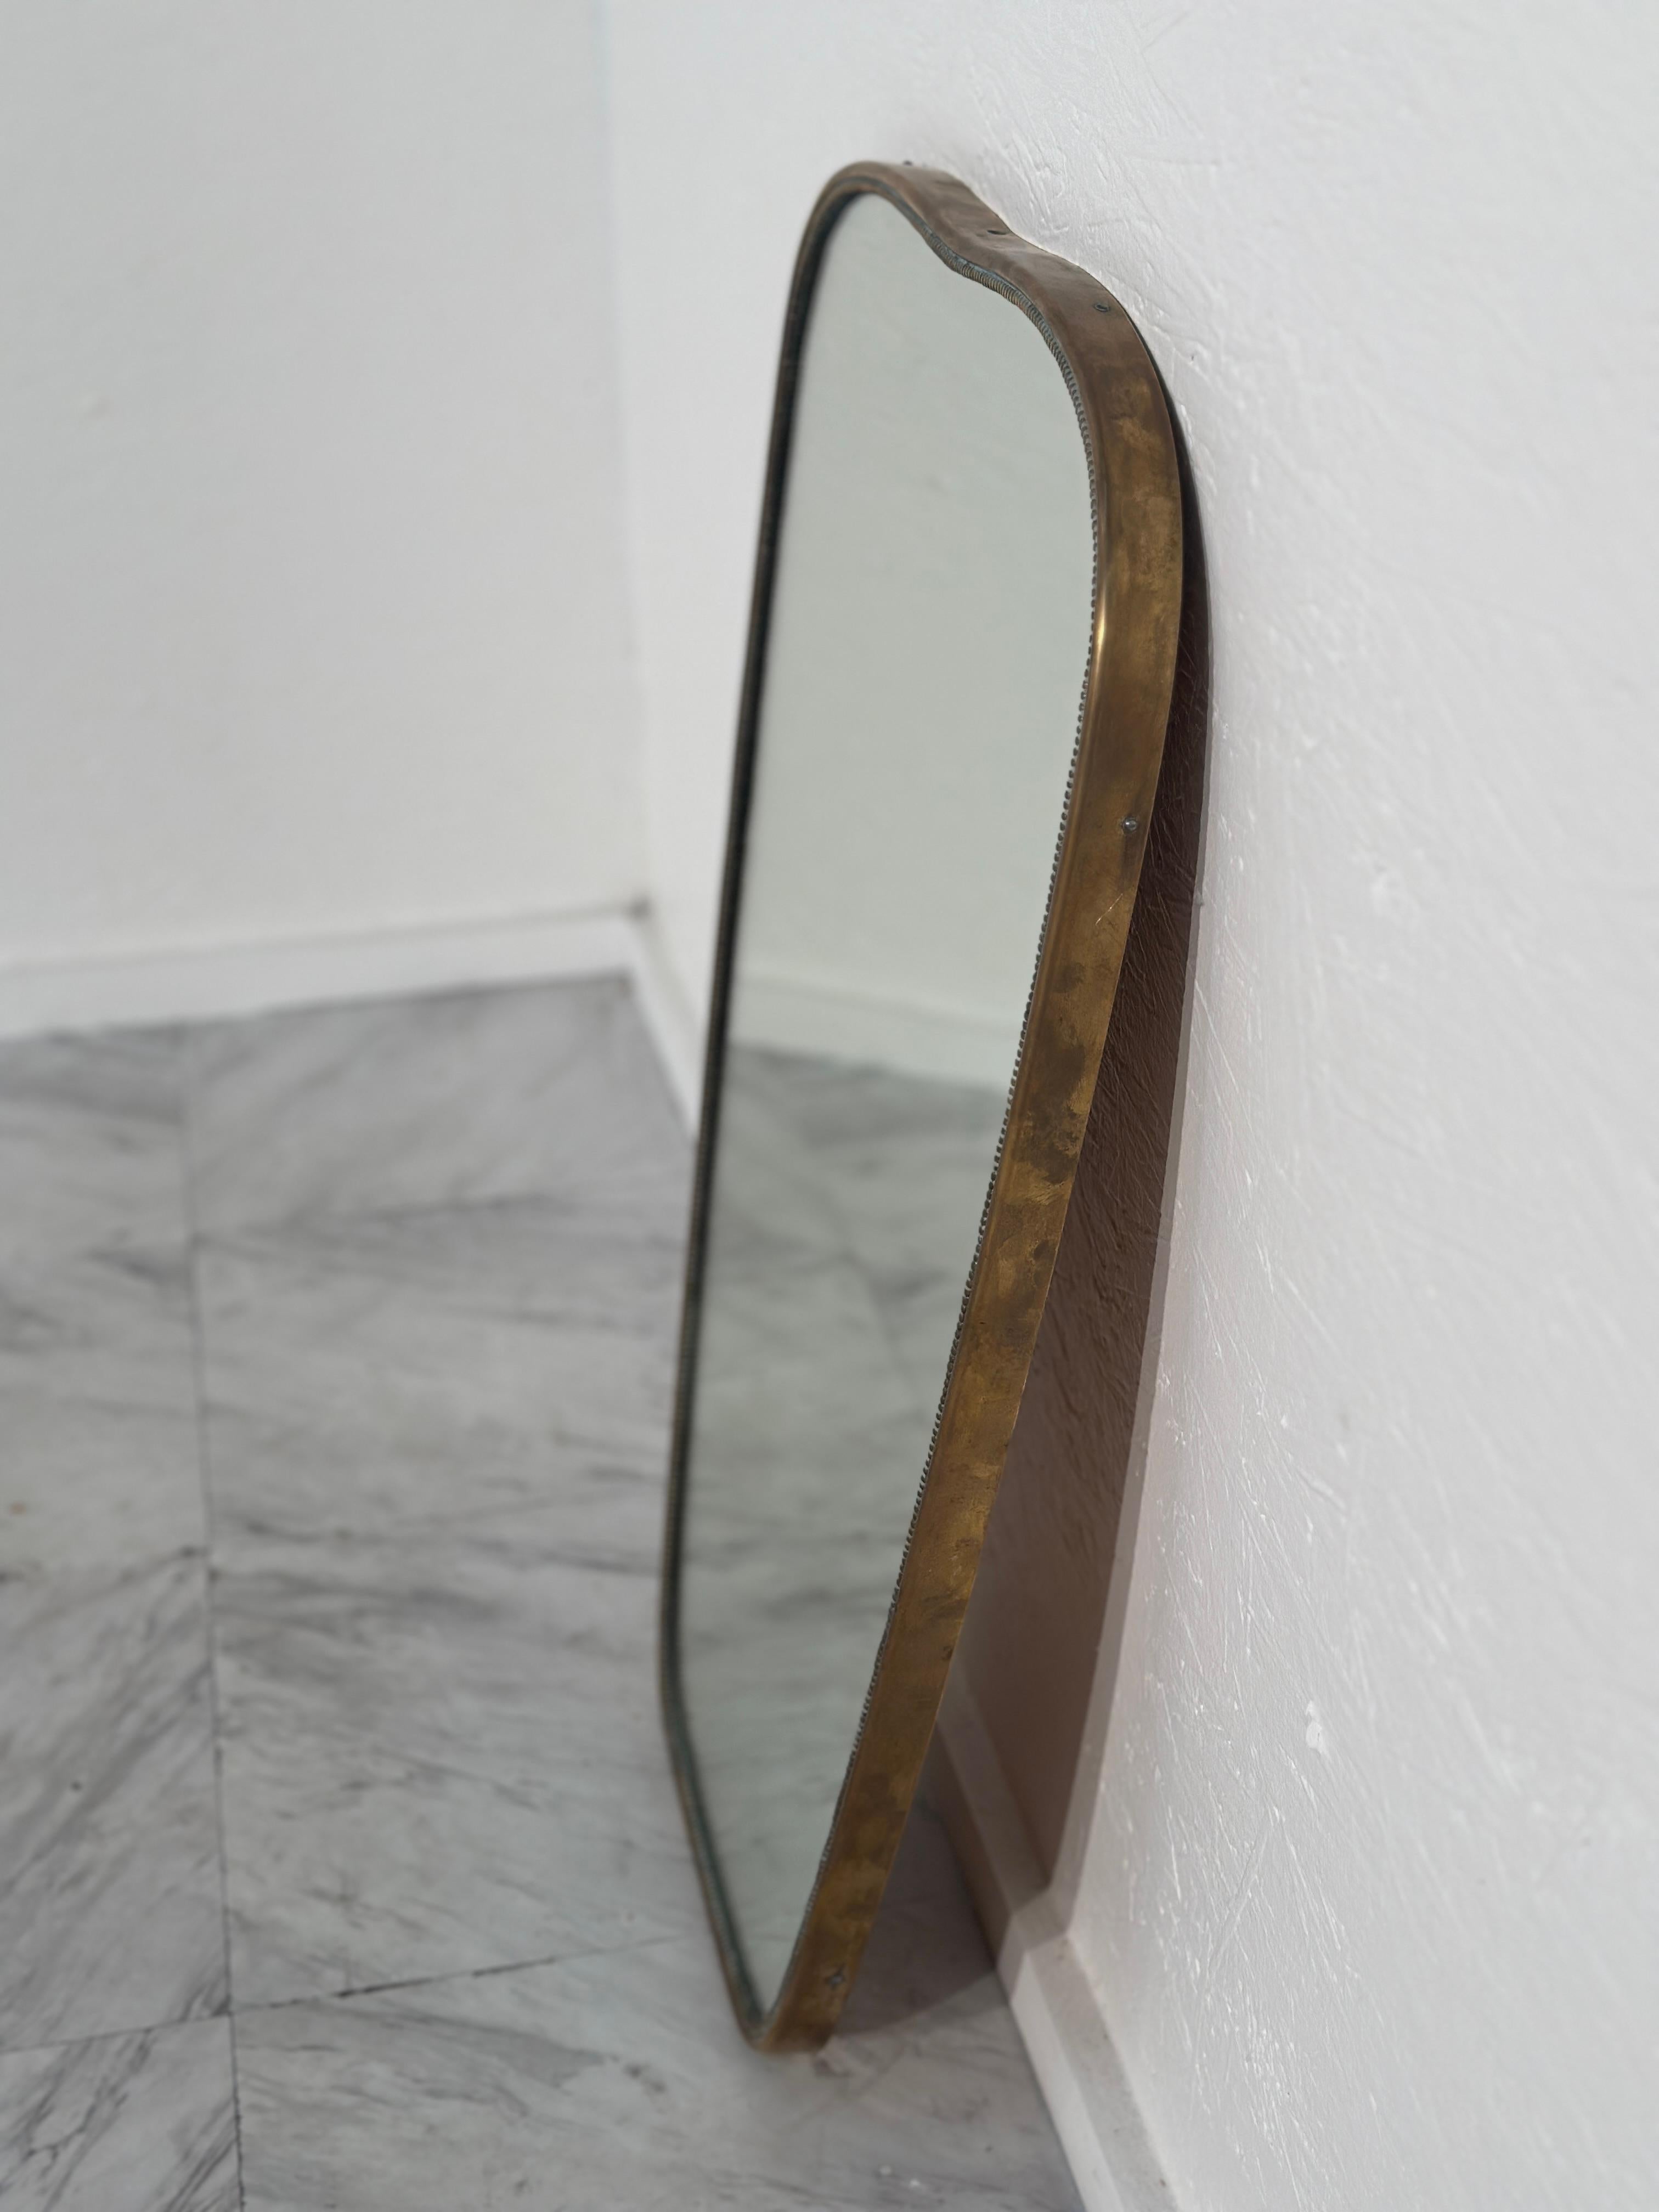 The Vintage Italian Rectangular Wall Mirror from the 1960s boasts a brass frame with original patina, showcasing its elegant aged character in a sleek, timeless design.

